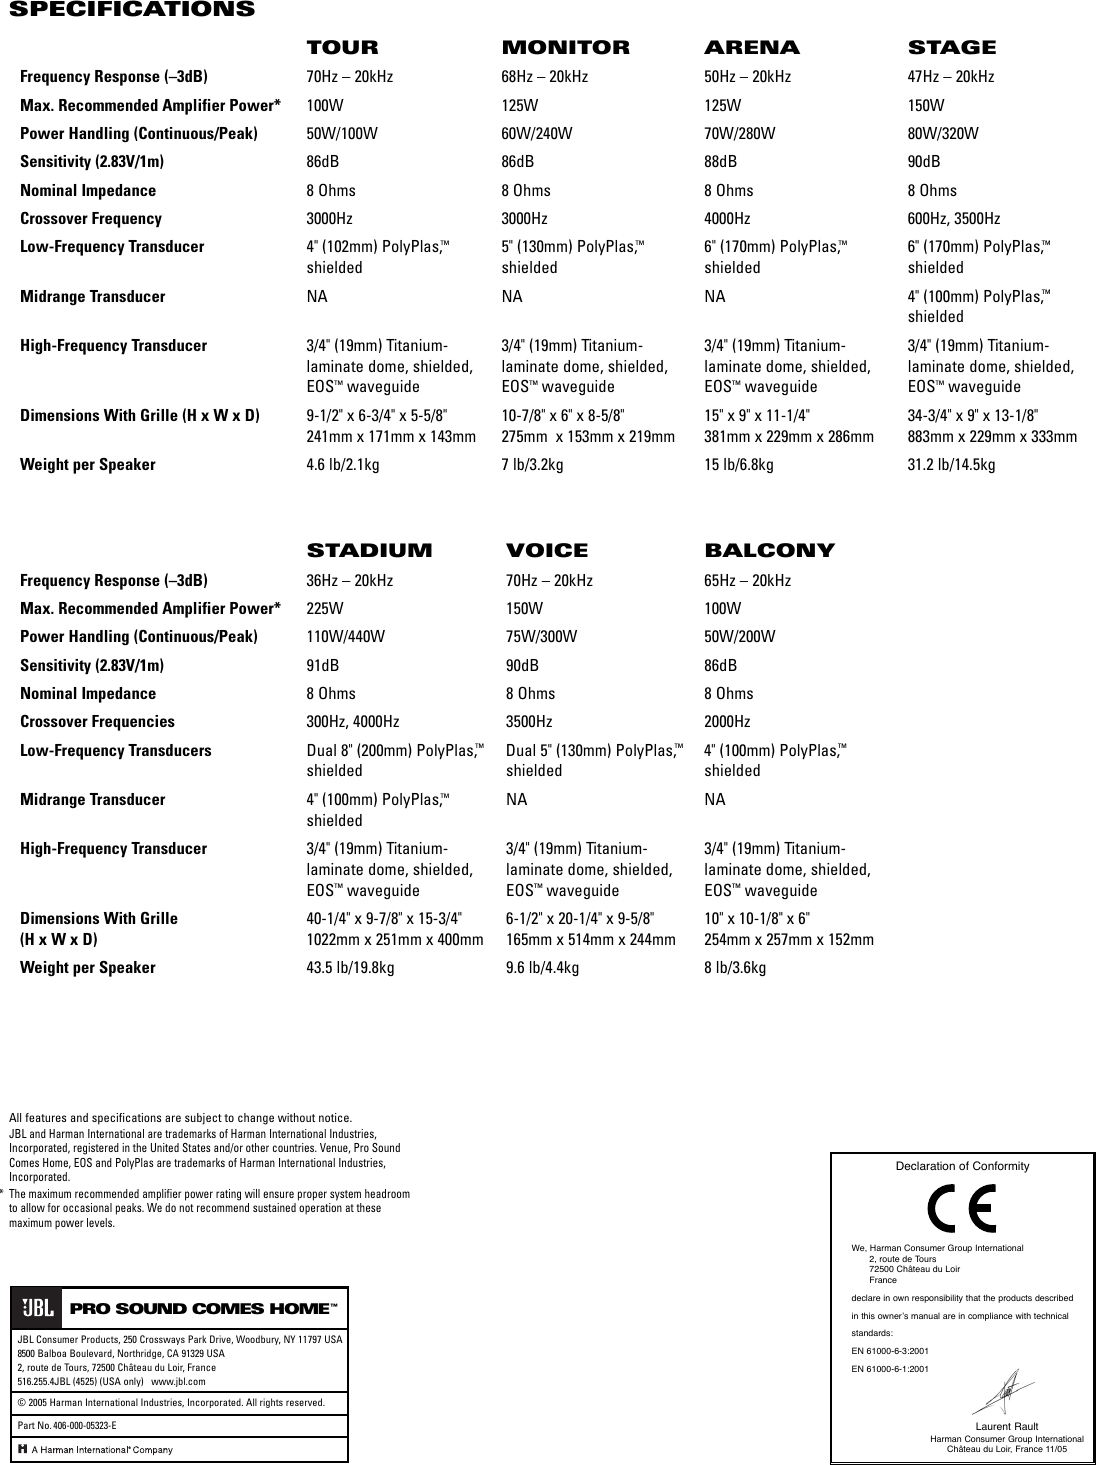 Page 4 of 4 - Bose Speakers Venue Series OM User Manual  To The B595ee75-ed94-438e-8fa3-88975d95f668